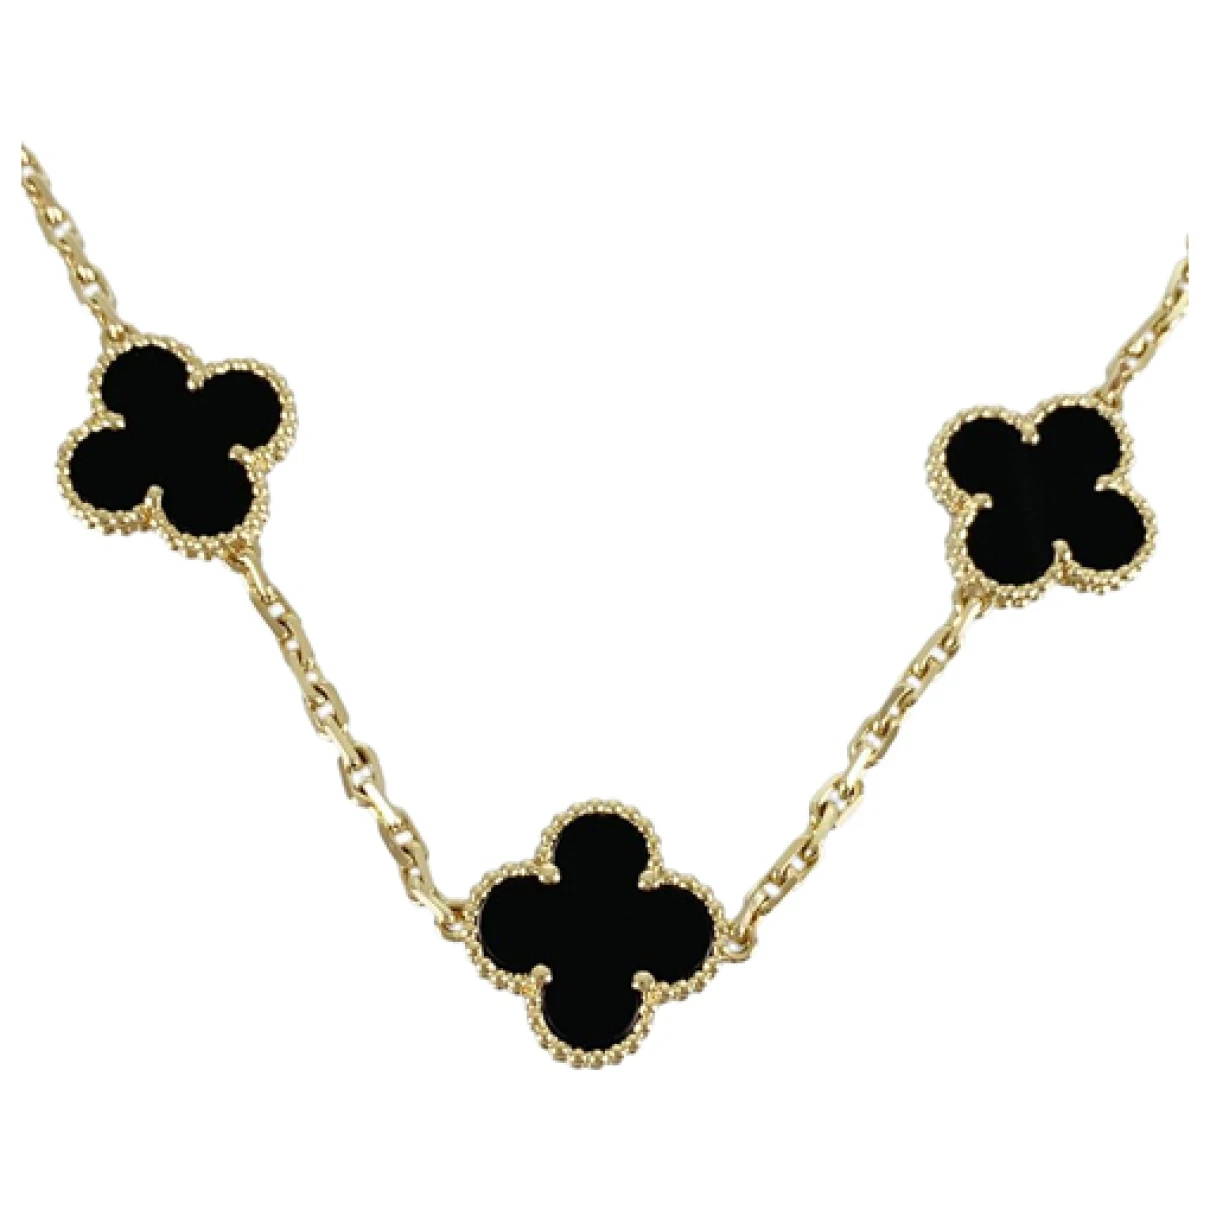 jewellery Van Cleef & Arpels necklaces Vintage Alhambra for Female Yellow gold. Used condition